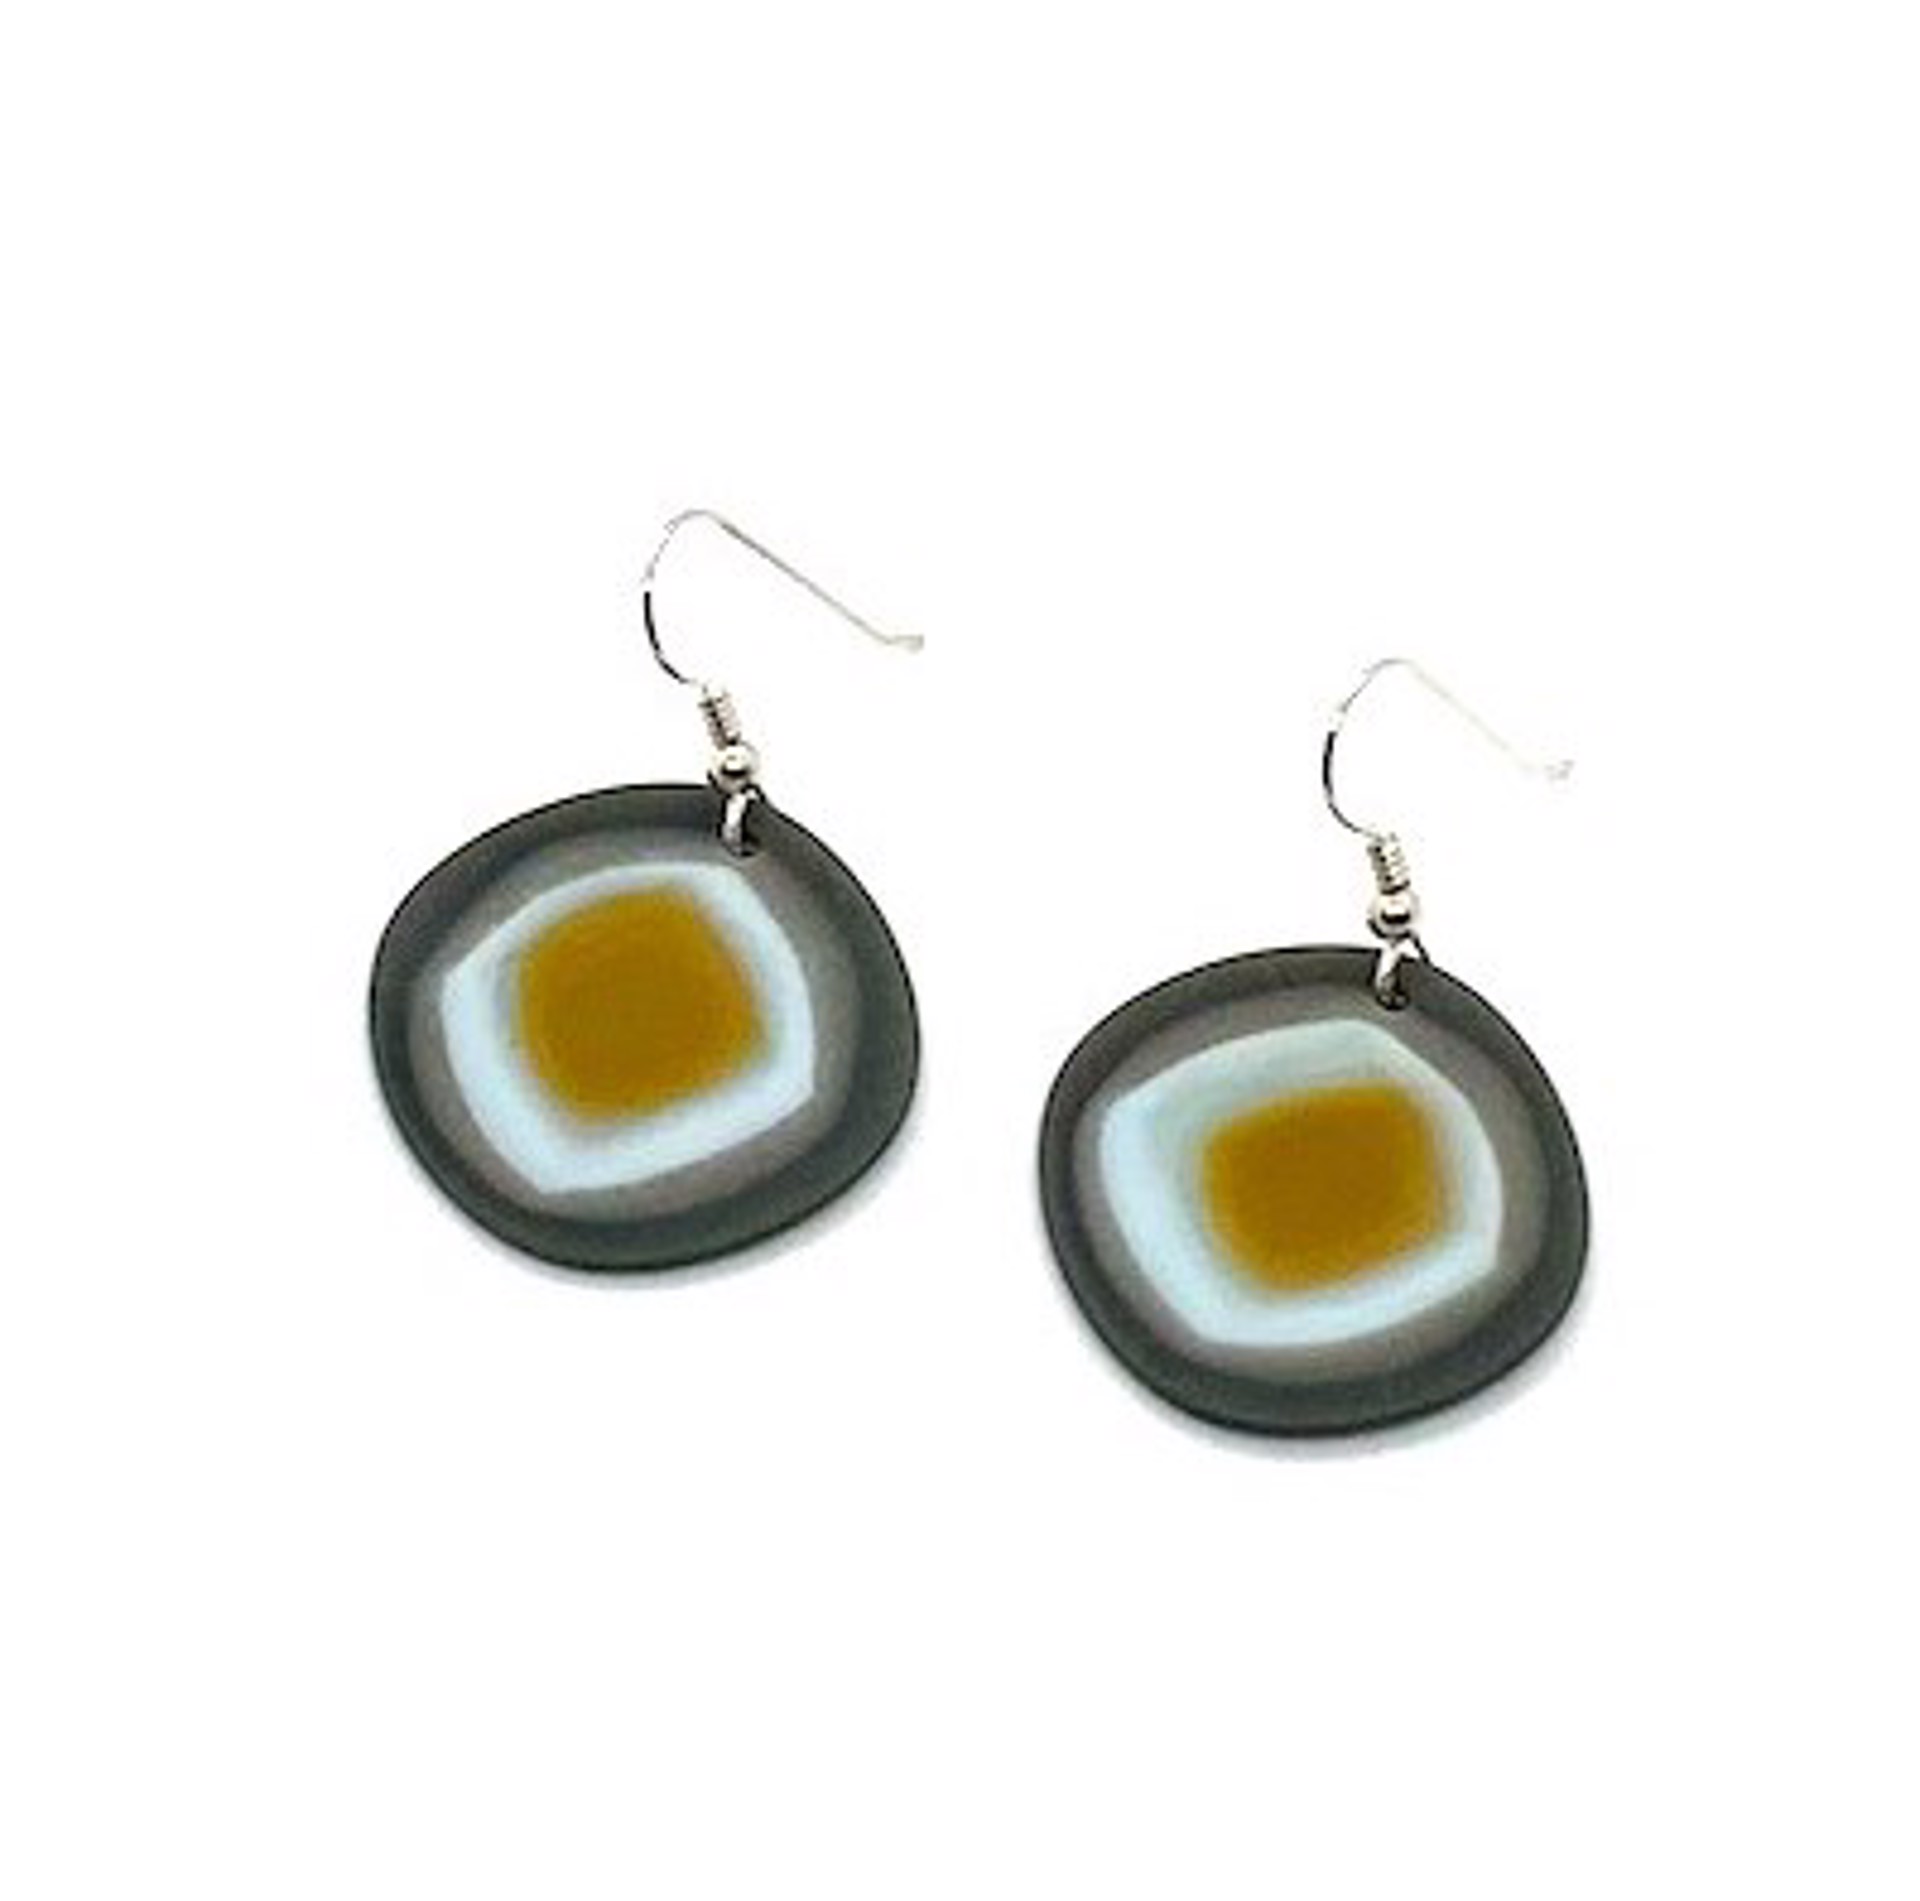 Compressed Glass Earrings - Slate Gray/French Vanilla/ Mocha by Chris Cox